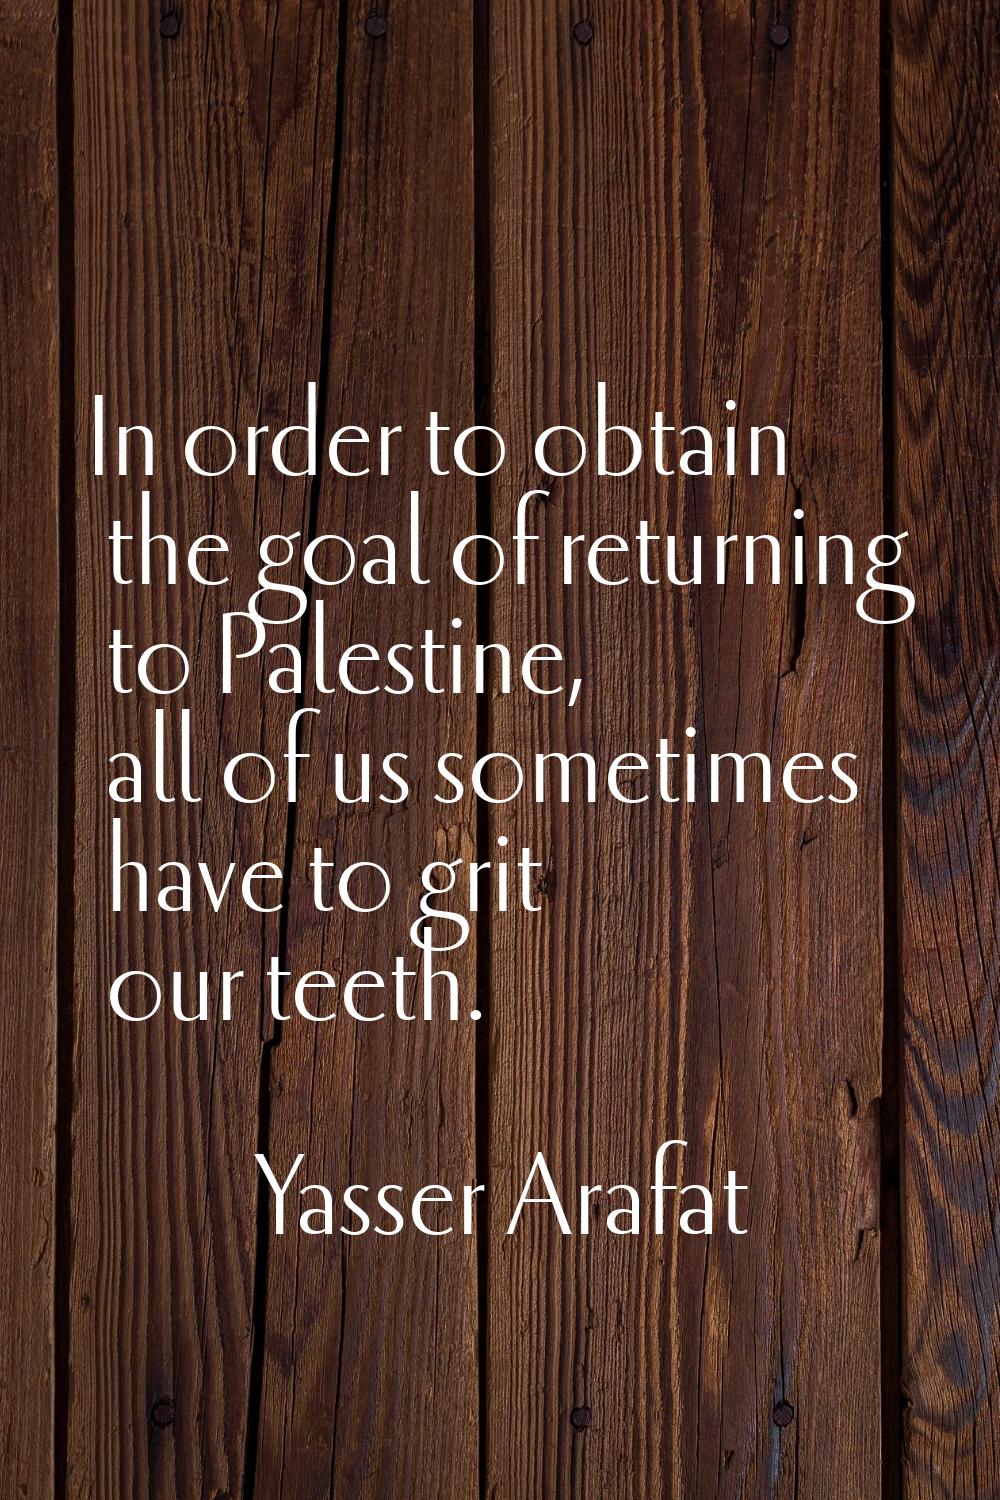 In order to obtain the goal of returning to Palestine, all of us sometimes have to grit our teeth.